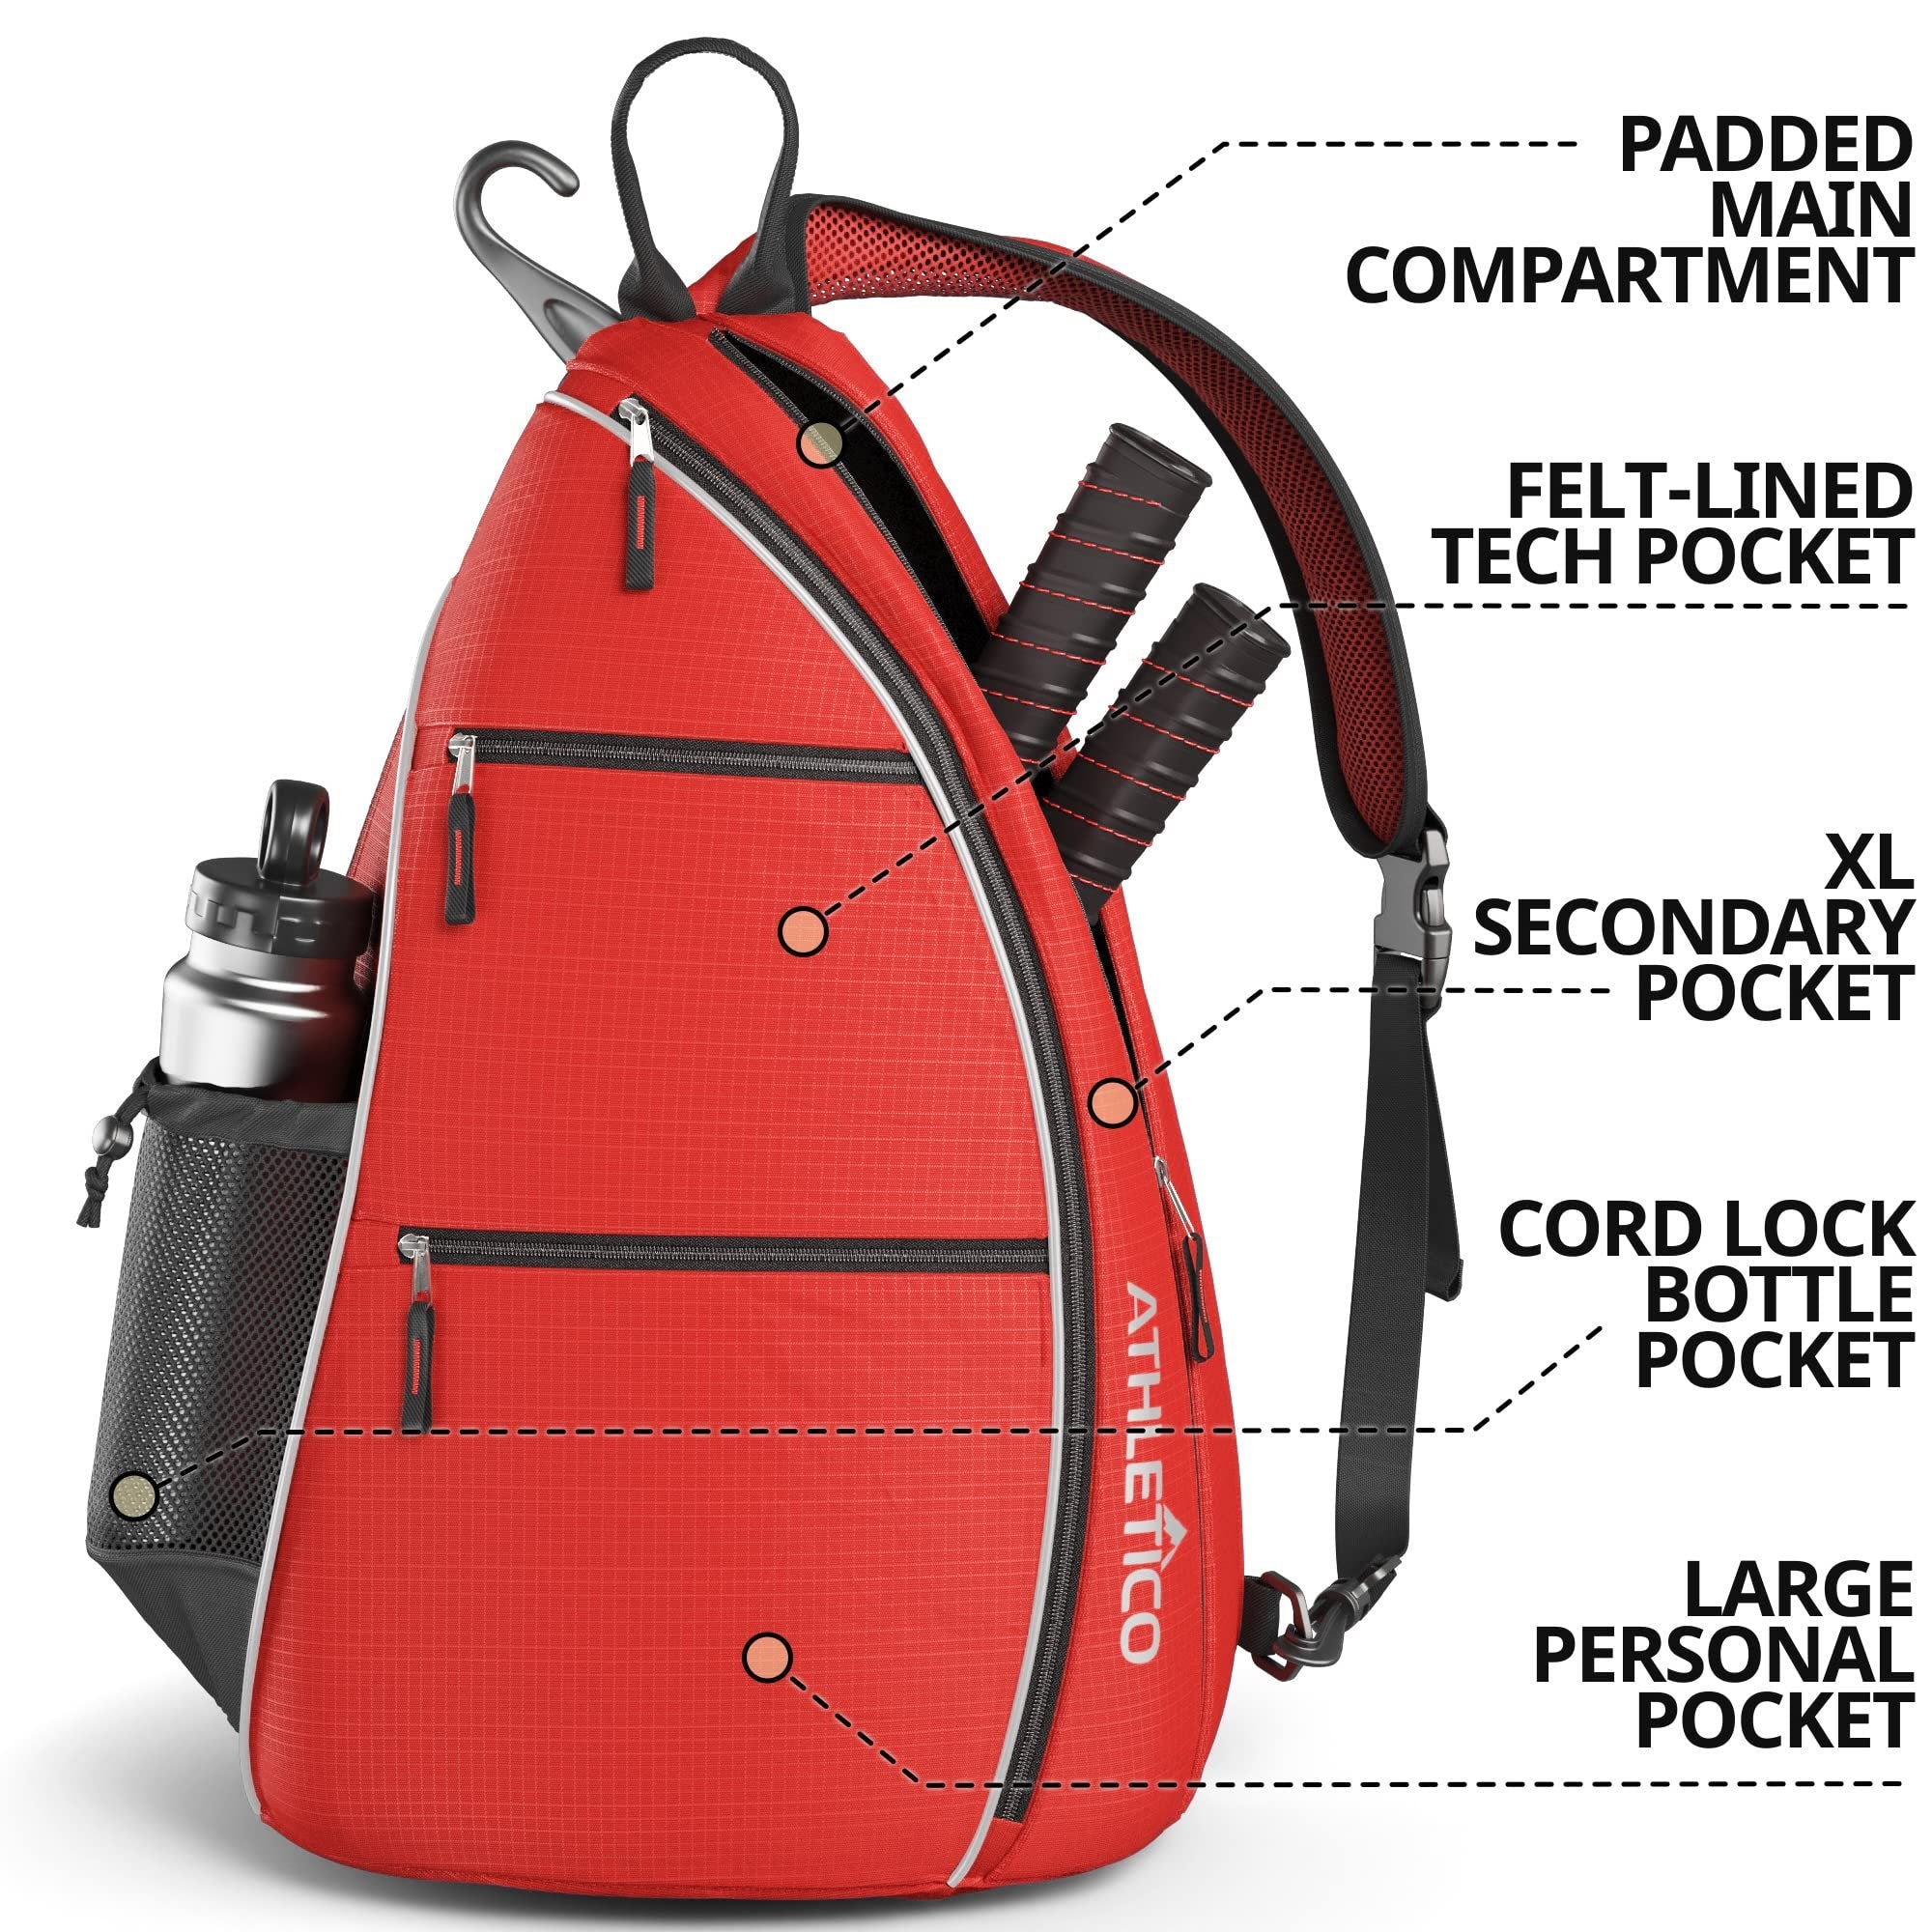 New Athletico Sling Bag - Crossbody Backpack for Pickleball, Tennis, Racquetball, and Travel for Men and Women (Red)